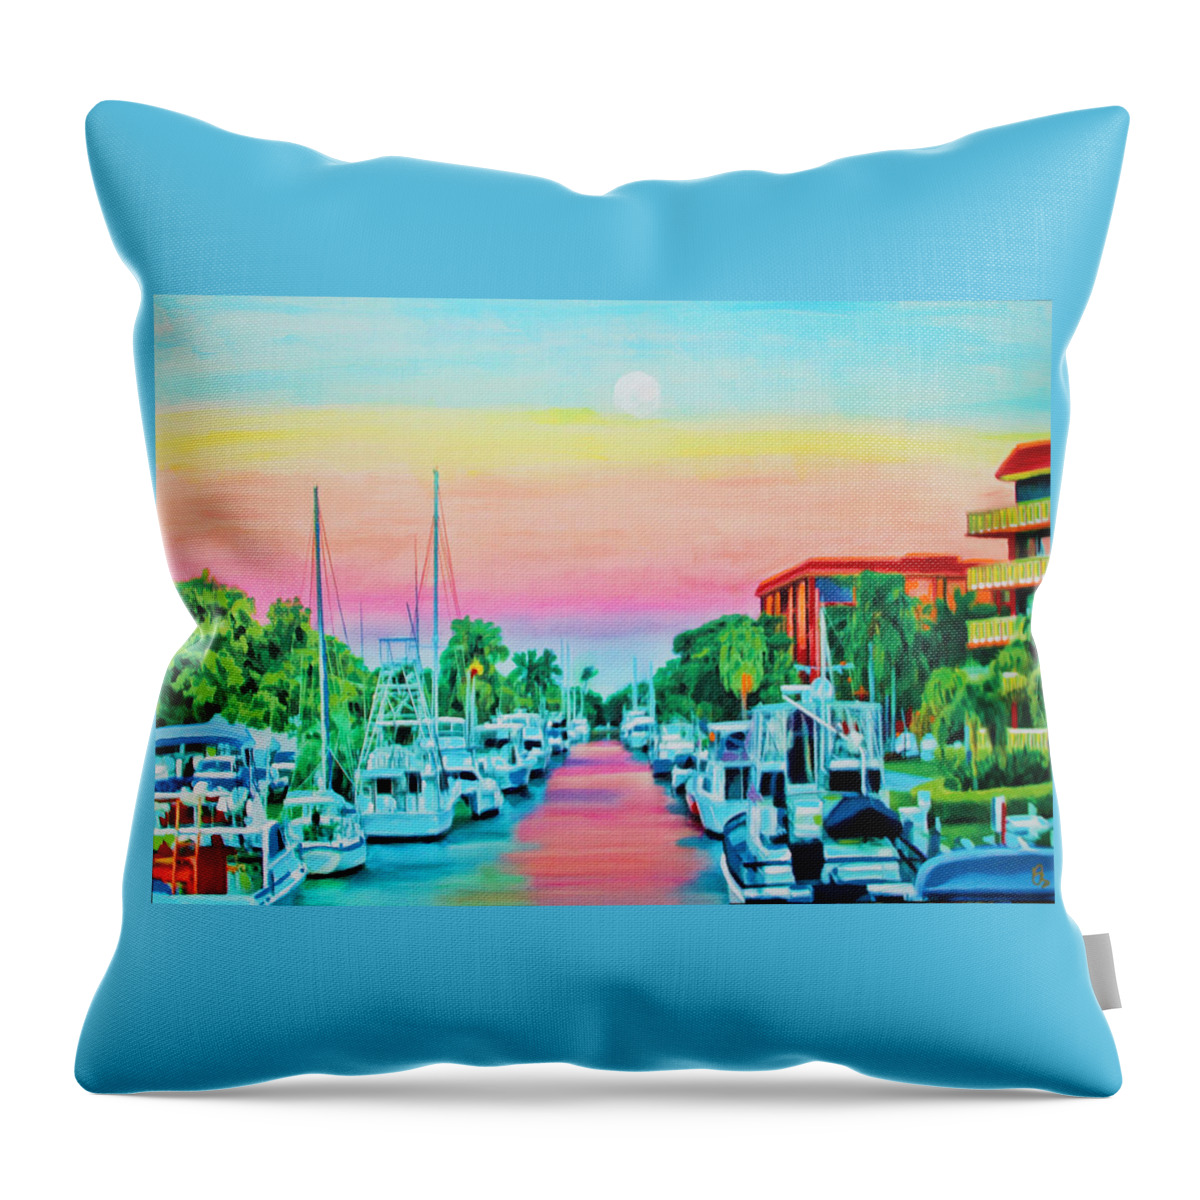 Sunset Throw Pillow featuring the painting Sunset On The Canal by Deborah Boyd